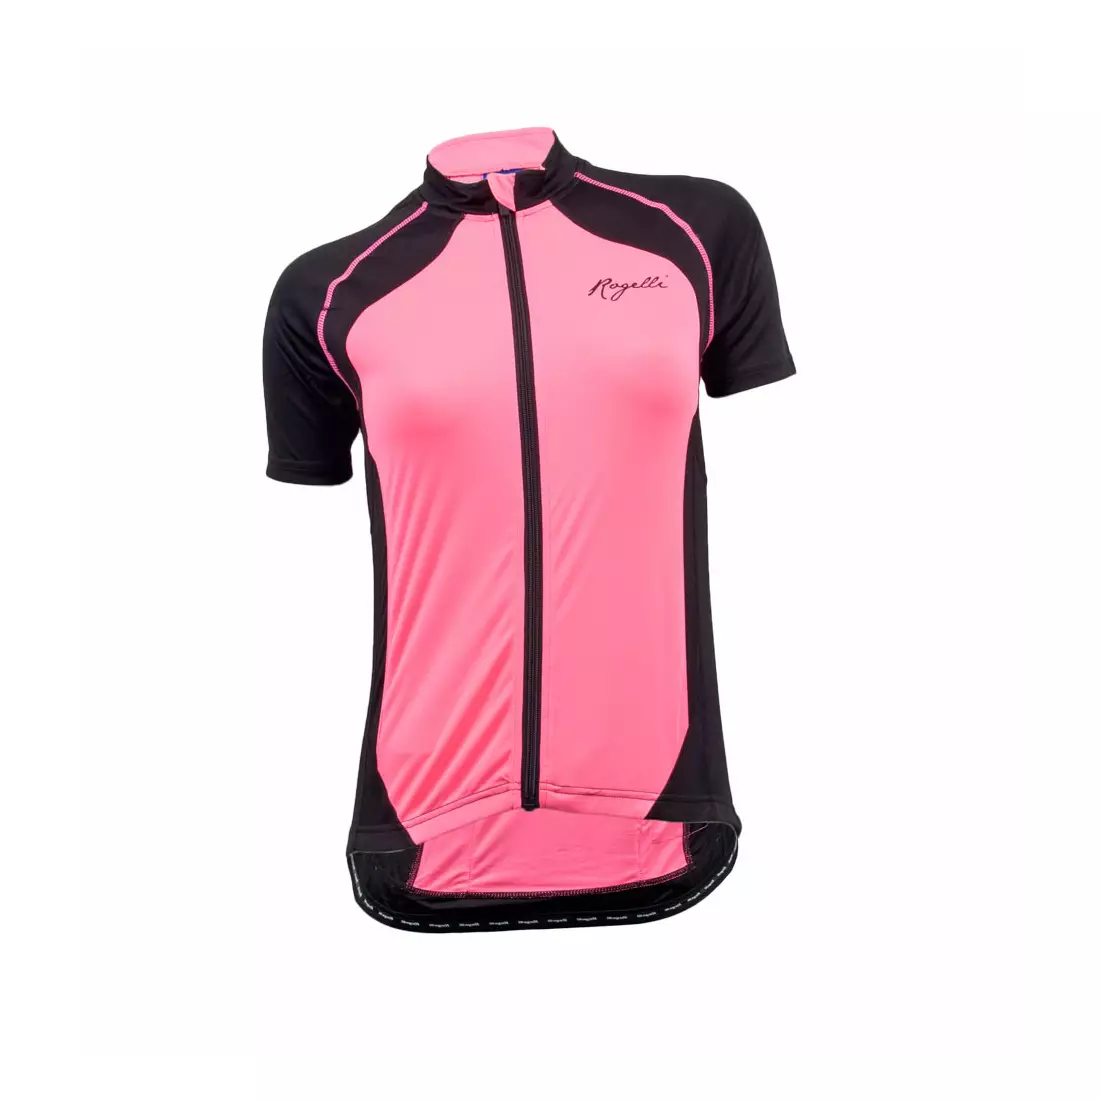 ROGELLI BICE - women's cycling jersey, black and pink